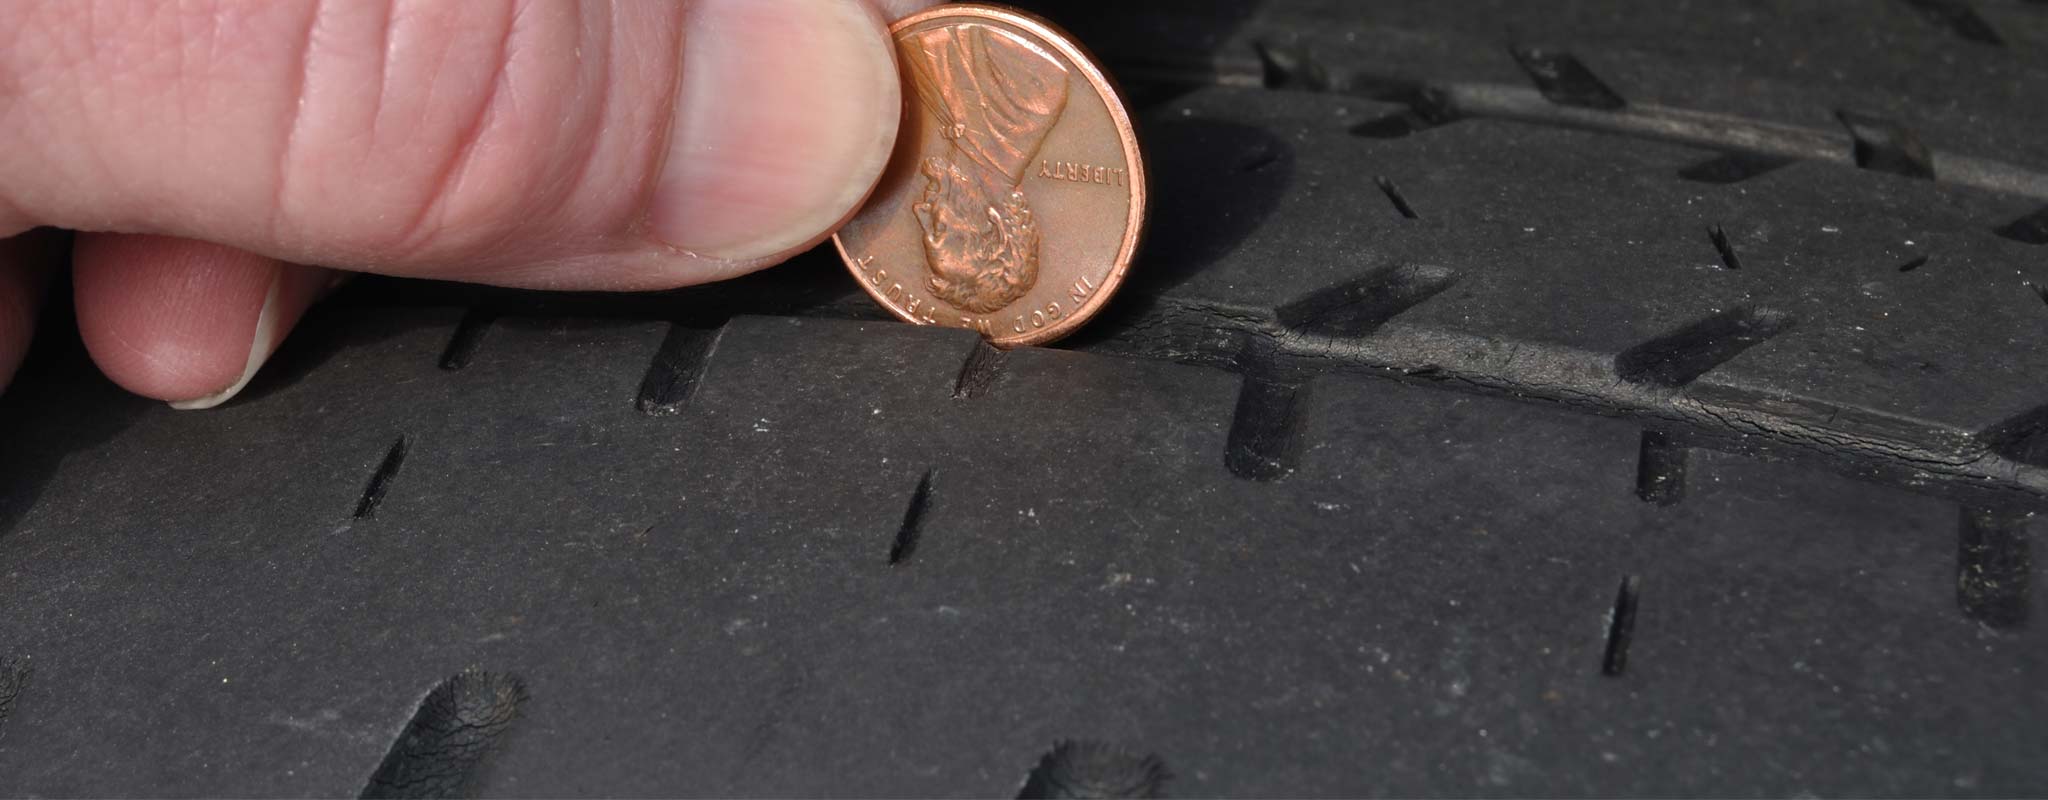 How to Tell If You Need New Tires Penny Test 